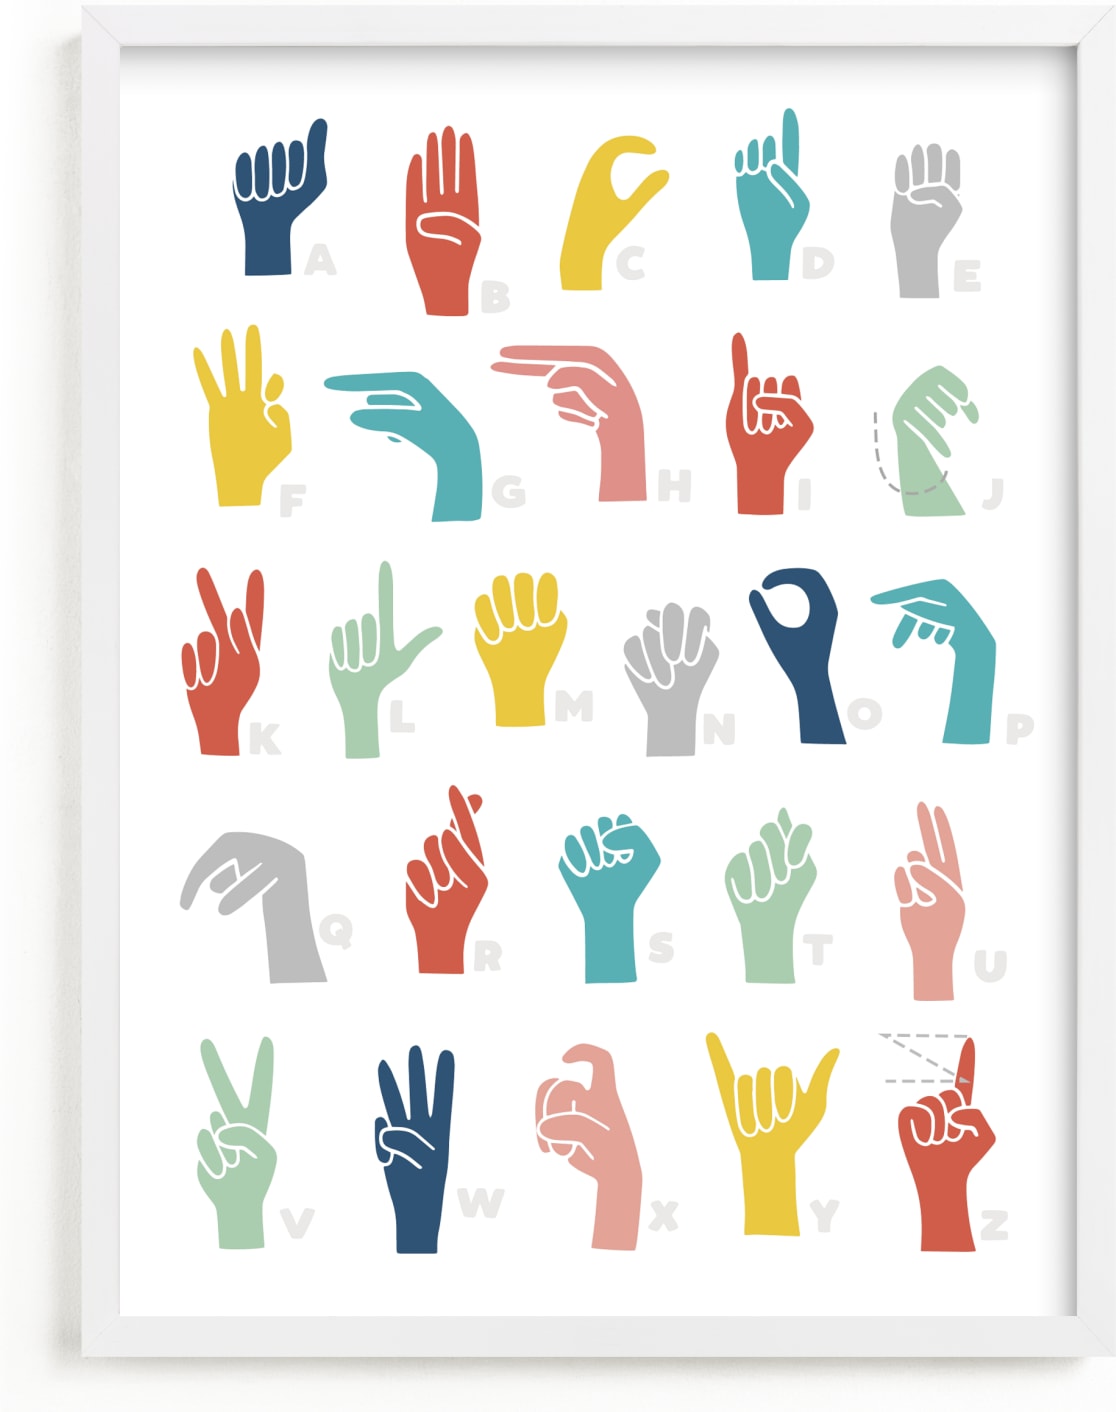 This is a colorful art by Jessie Steury called American Sign Language ABCs.